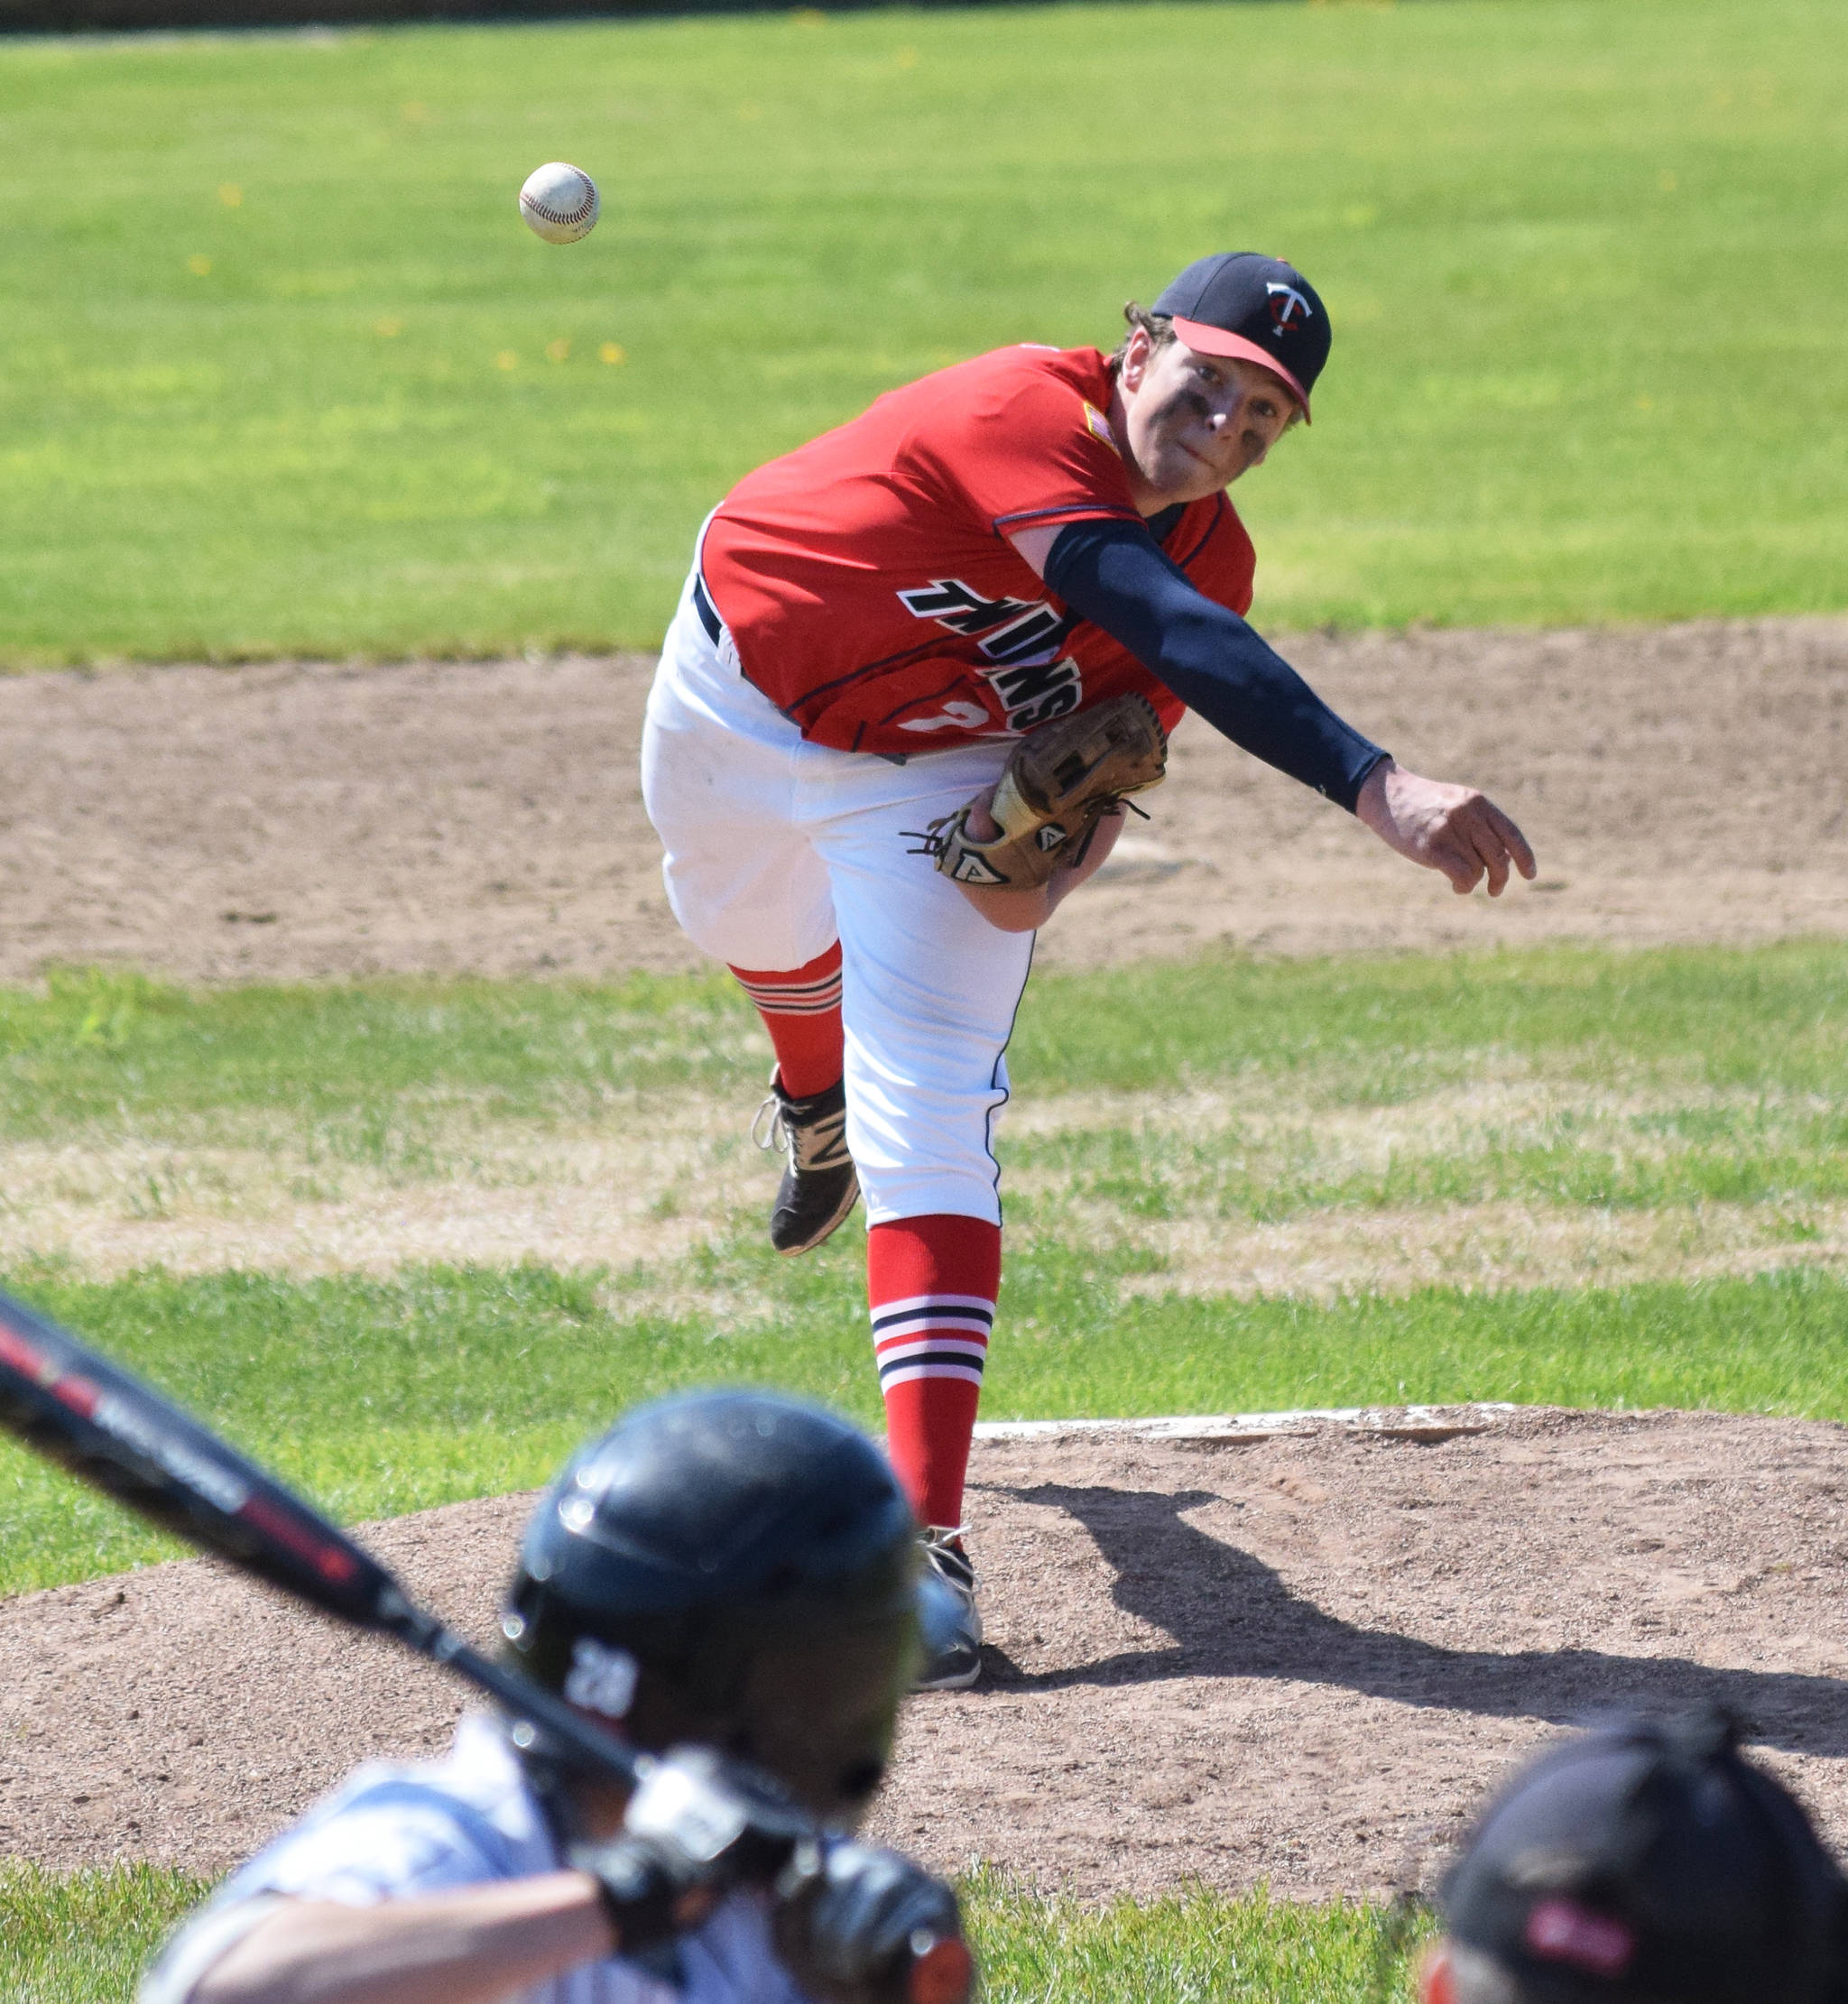 Twins pitcher Logan Smith unleashes a throw for a Chugiak batter Saturday, June 8, 2019, at Coral Seymour Memorial Park in Kenai, Alaska. (Photo by Joey Klecka/Peninsula Clarion)